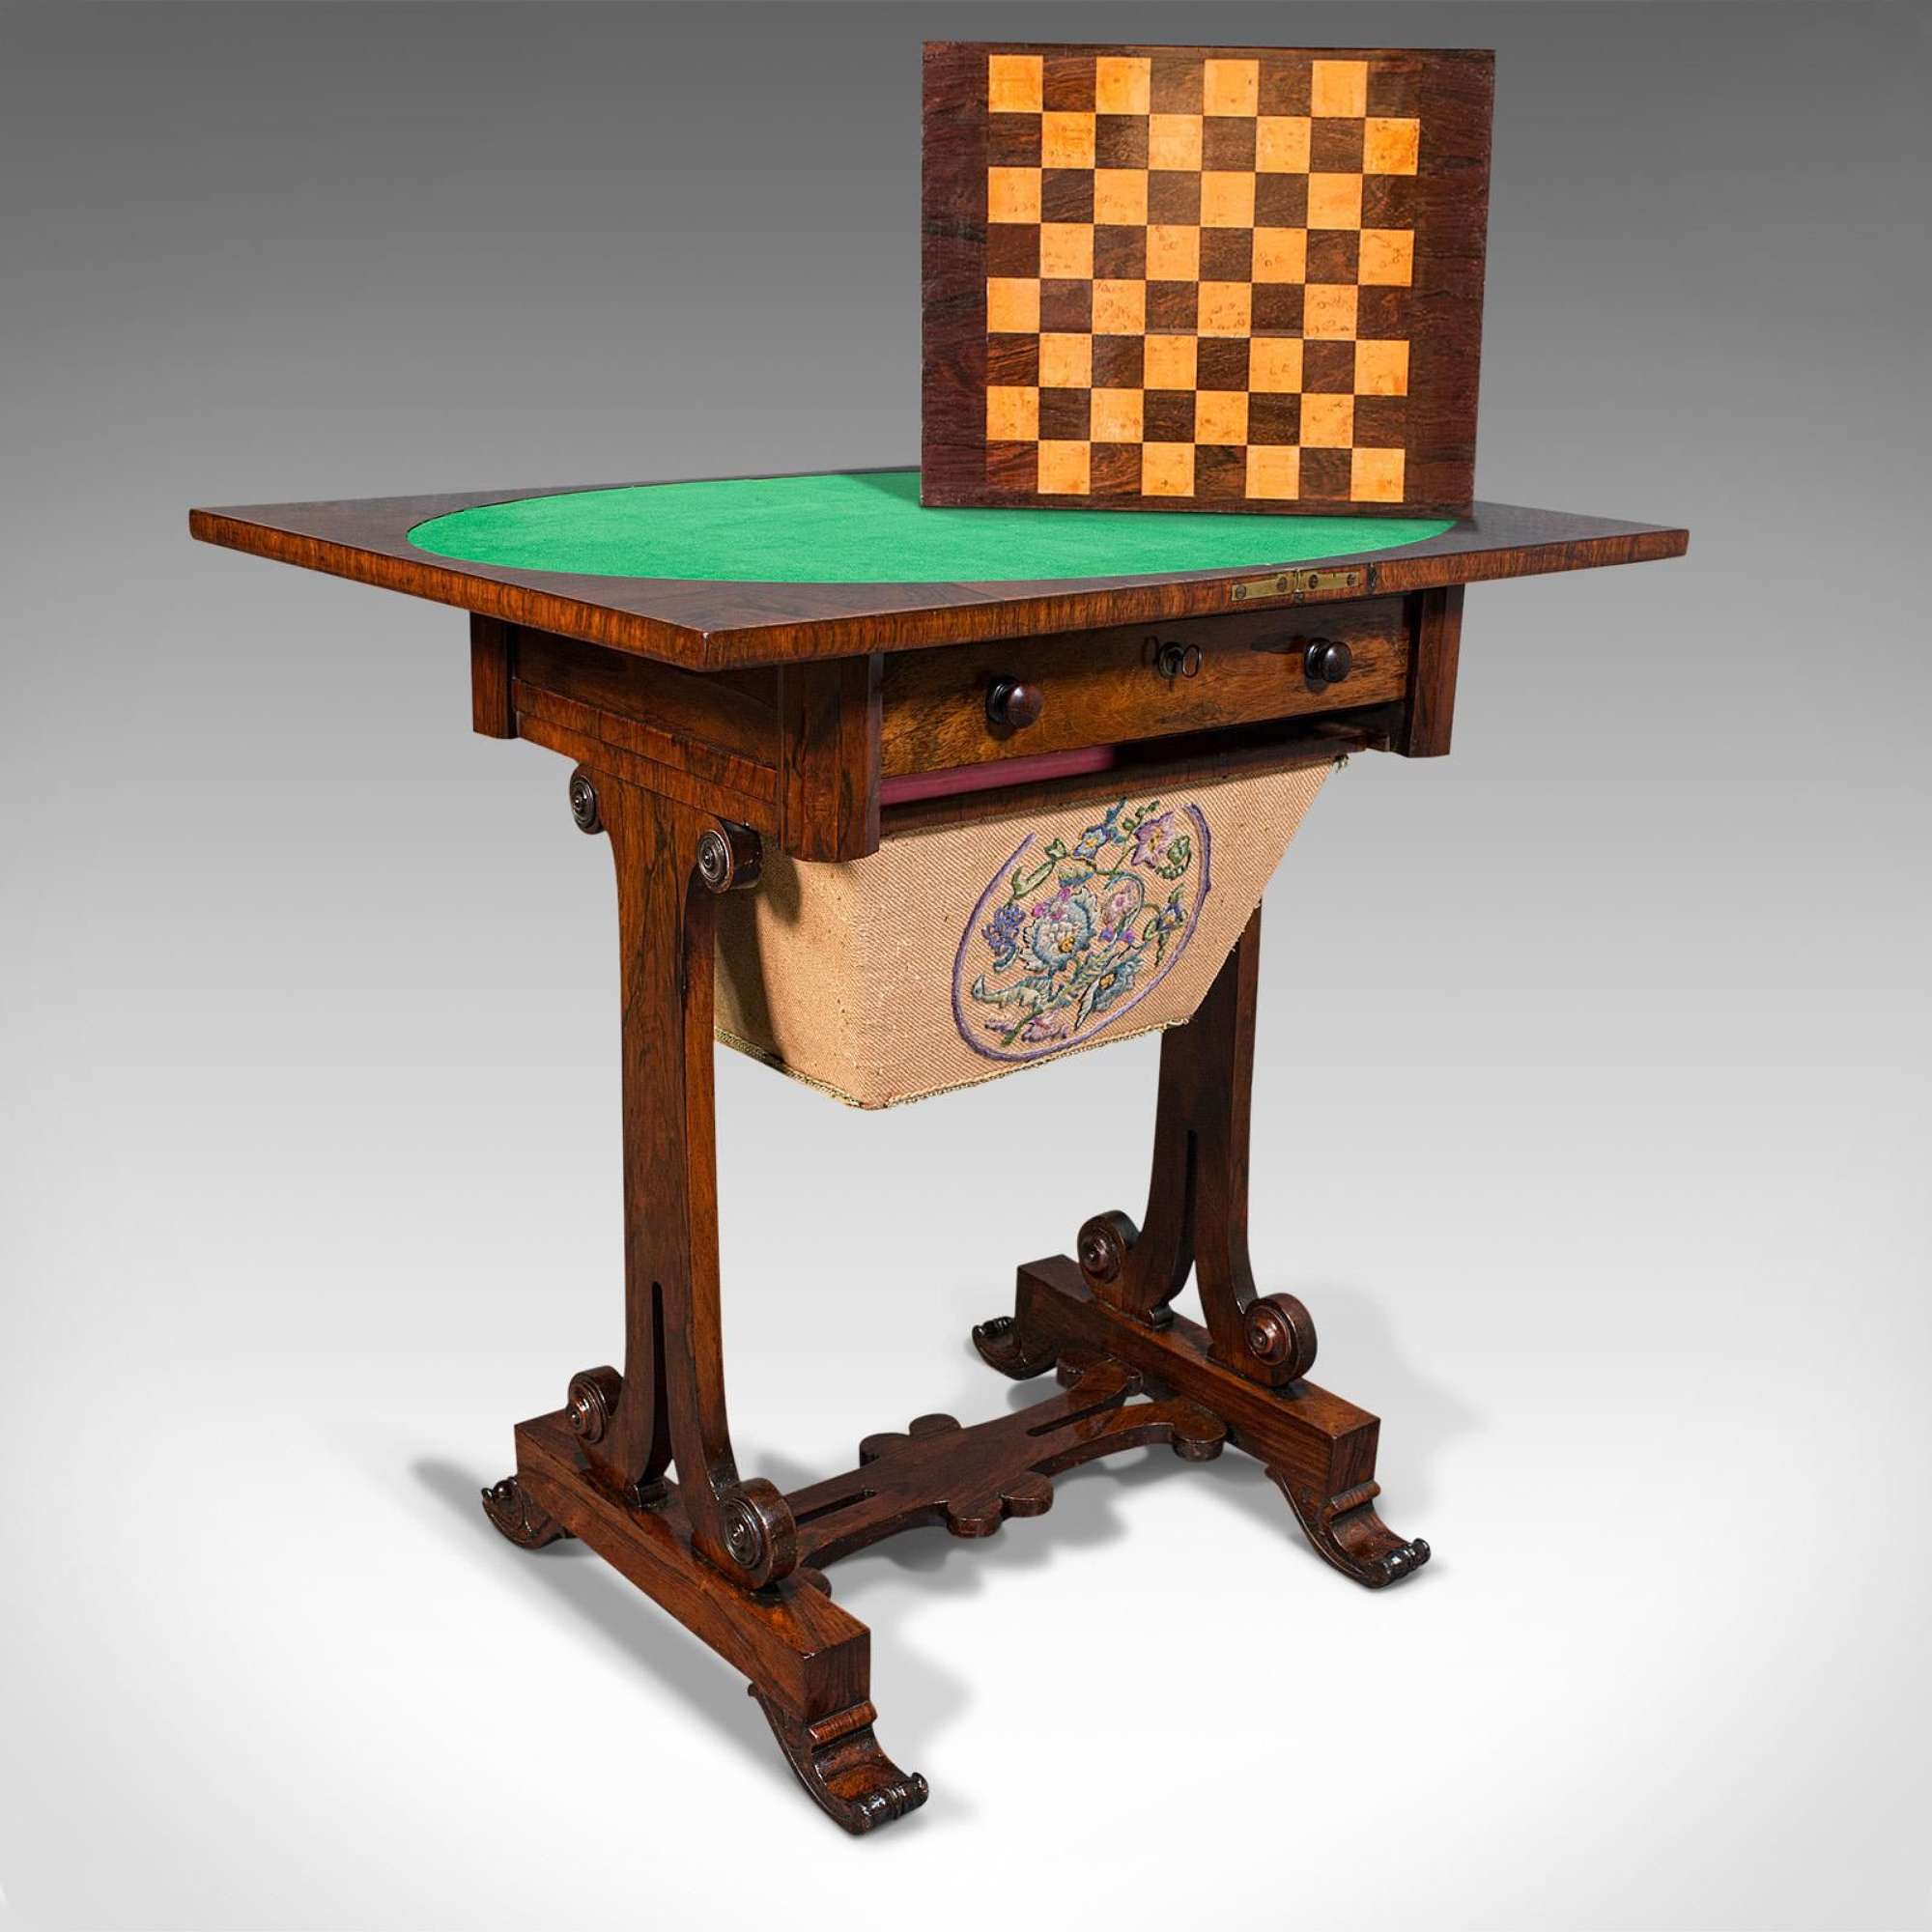 Antique Fold Over Games Table, English, Rosewood, Chess, Cards, Regency C.1820